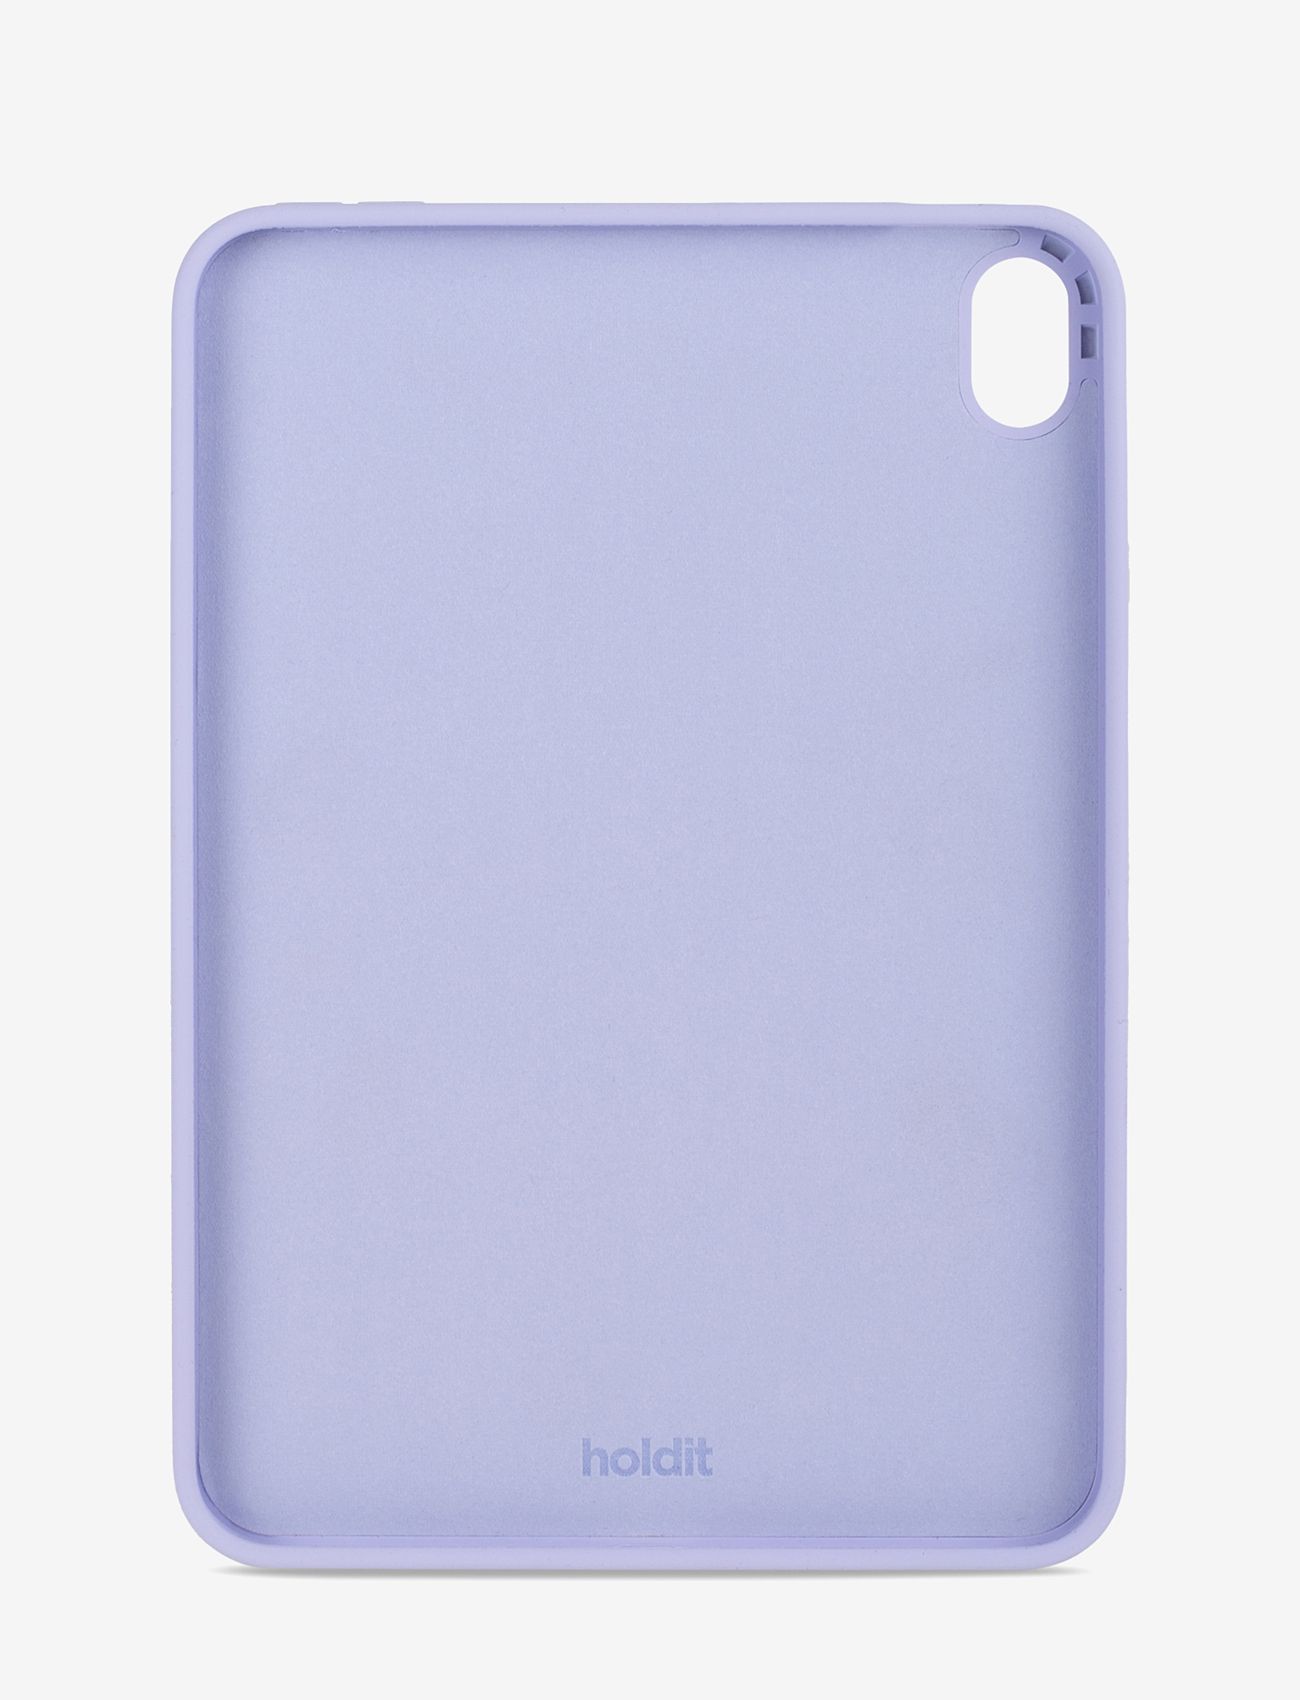 Holdit - Silicone Case iPad Mini 8.3 - tablet cases - lavender - 1